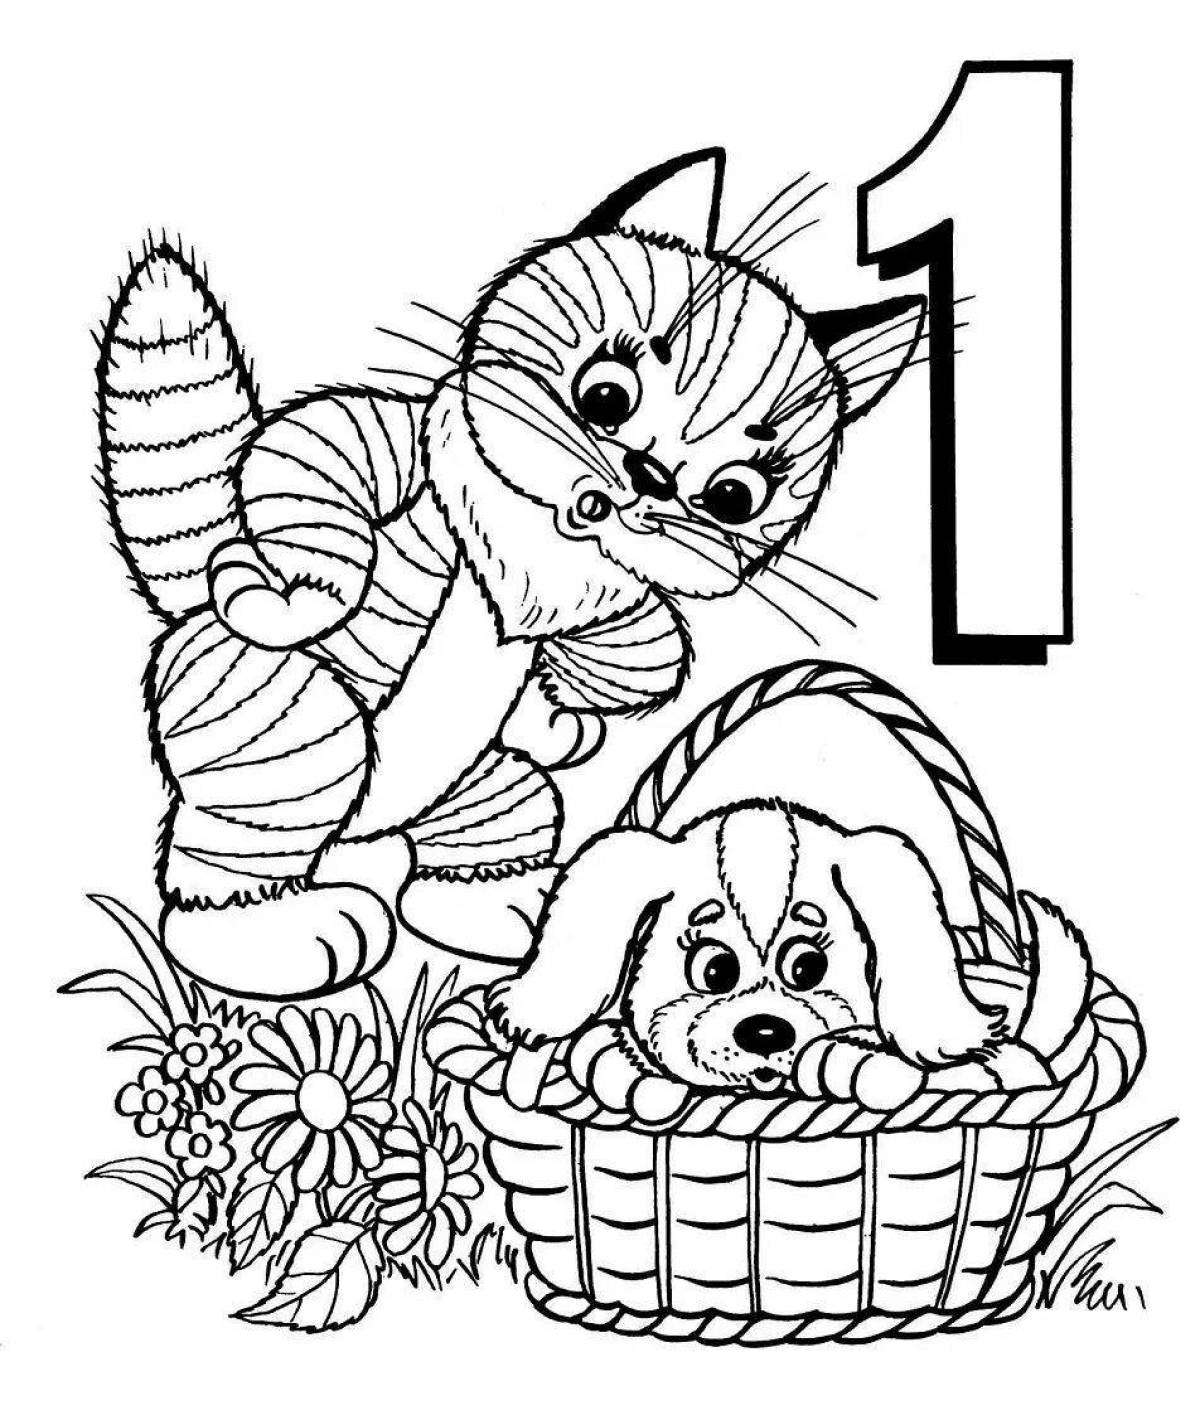 Shiny cat house coloring page for kids